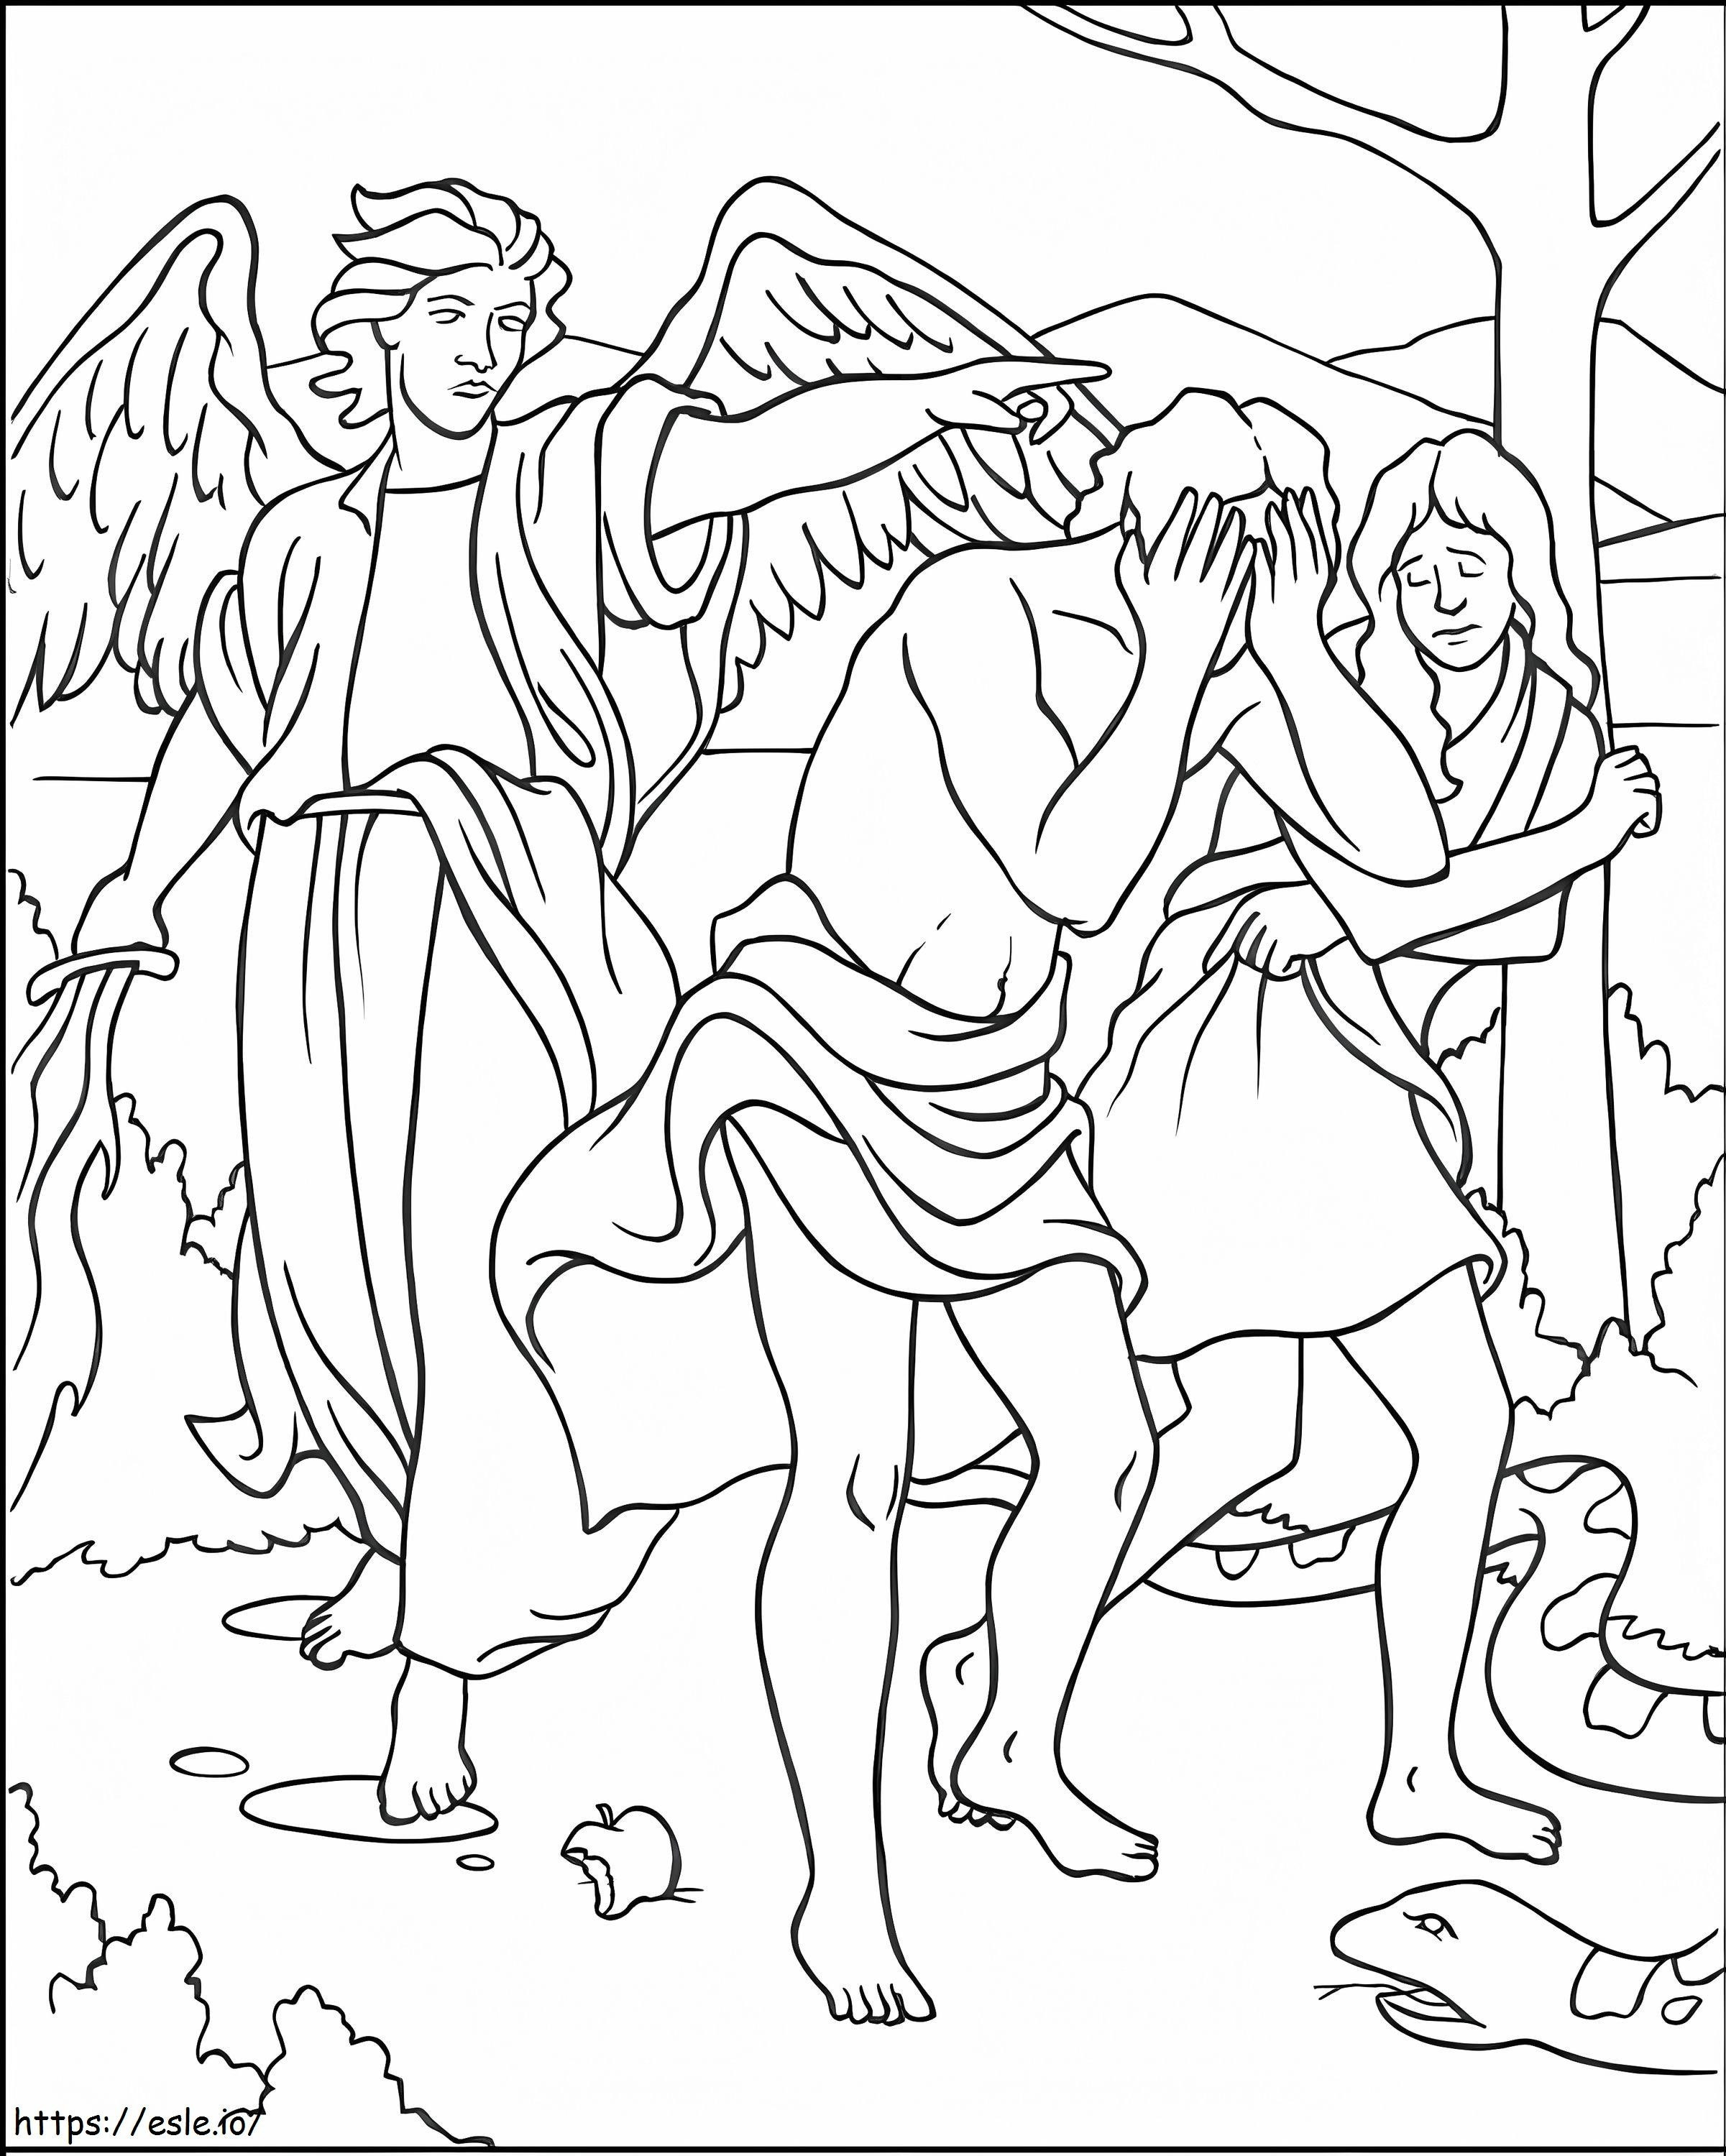 Adam And Eve Exiled From Eden coloring page